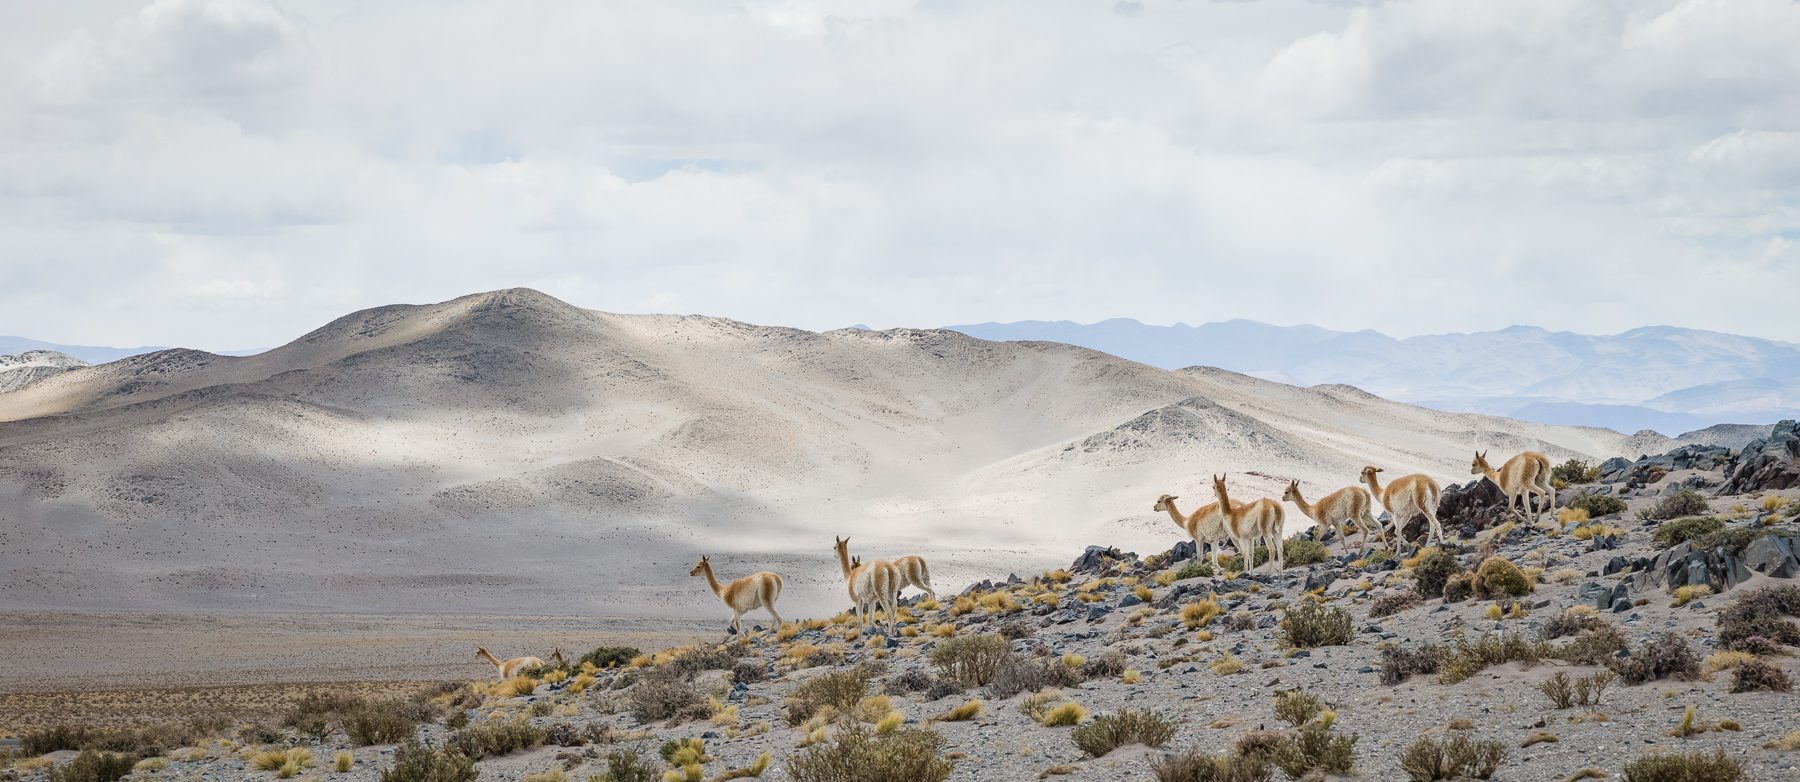 Photographing the Atacama Desert with the Leica S (Typ 006) | Red Dot Forum